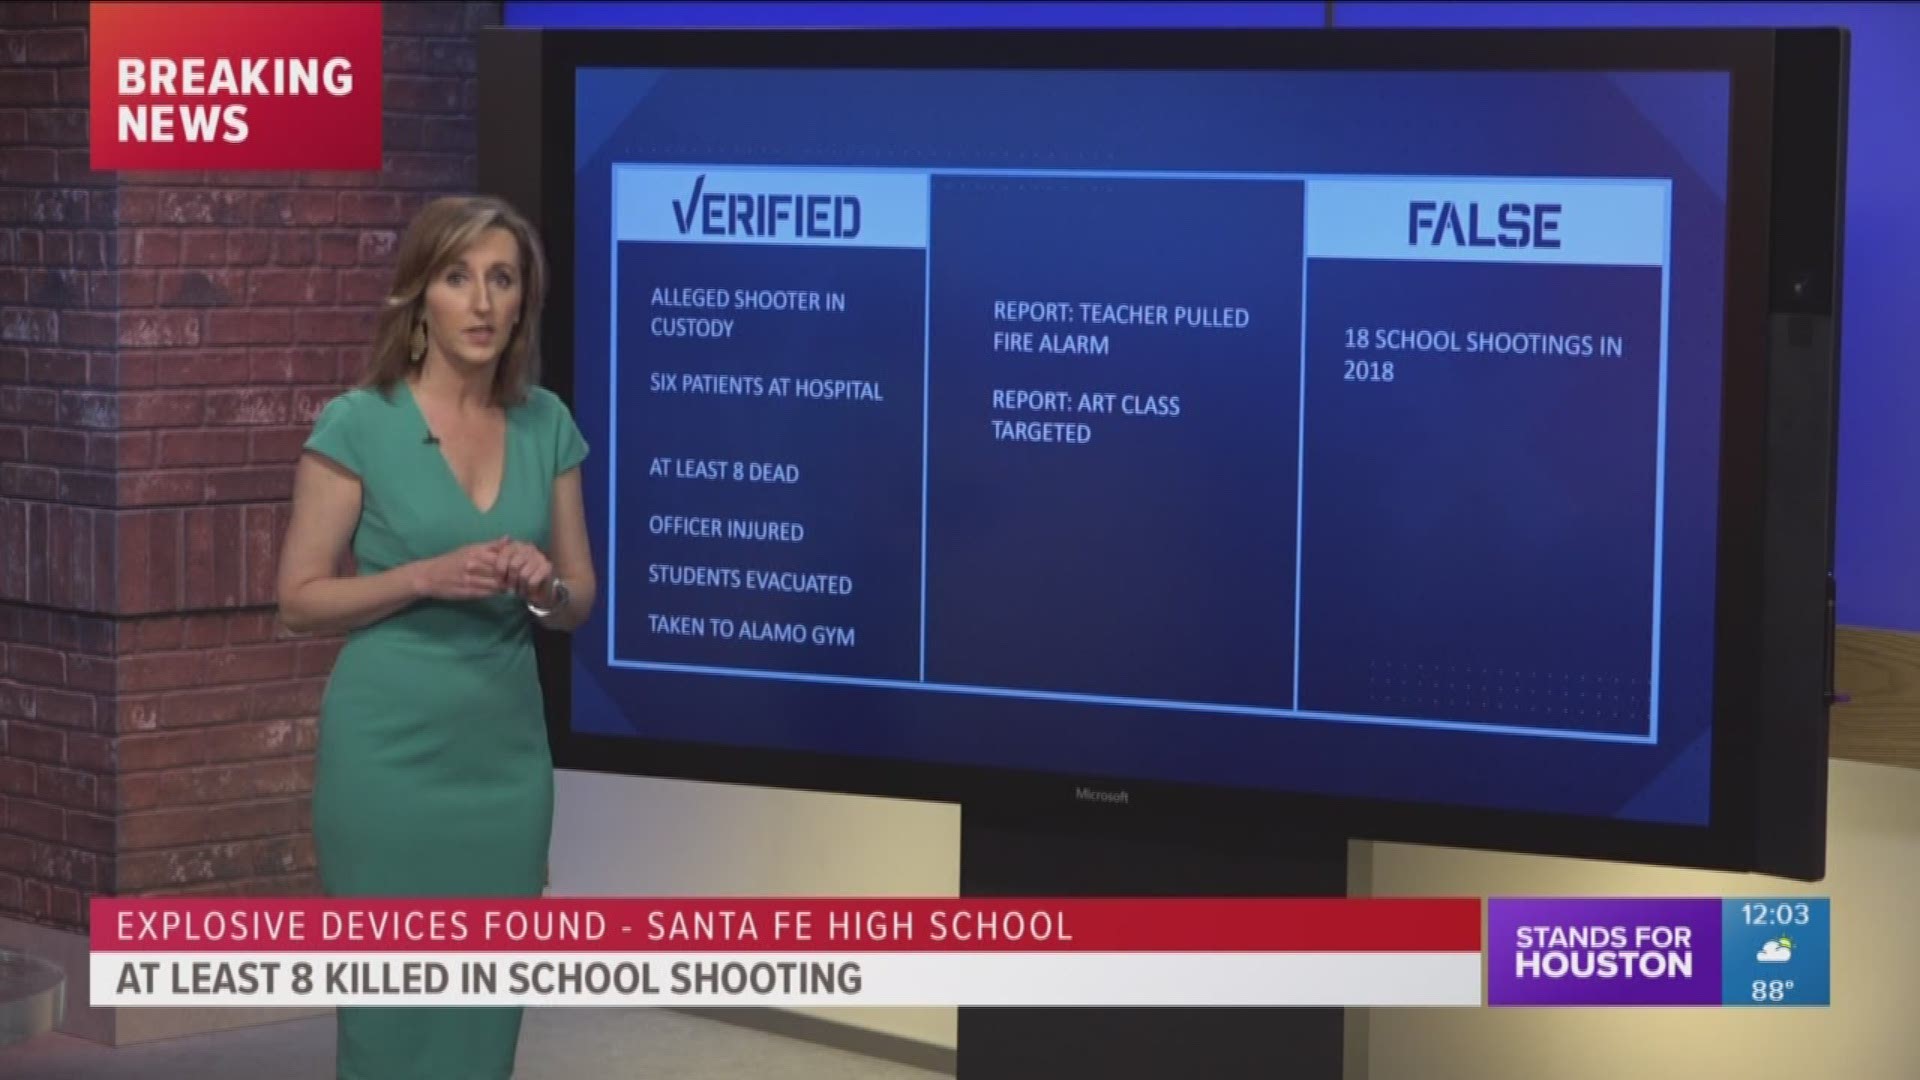 KHOU verifies the facts concerning the shooting at Santa Fe High School in Texas Friday morning.